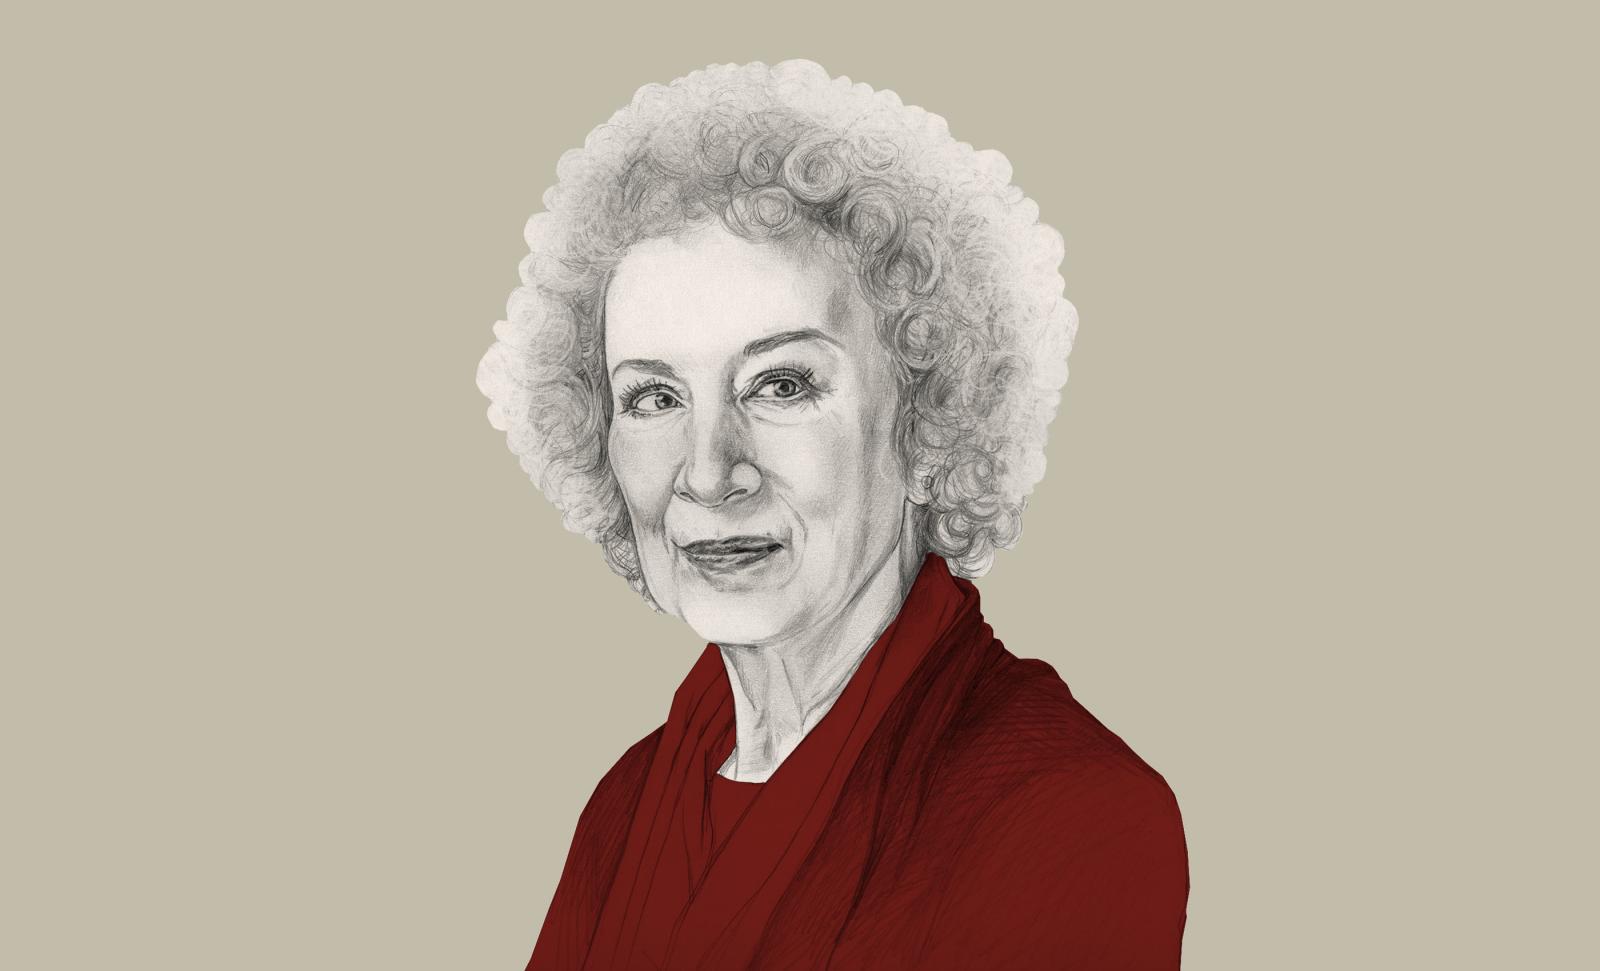 Margaret Atwood was told in college that to find her place in the world she should find a husband and become a wife. Then she went to Harvard and became an award-winning writer.